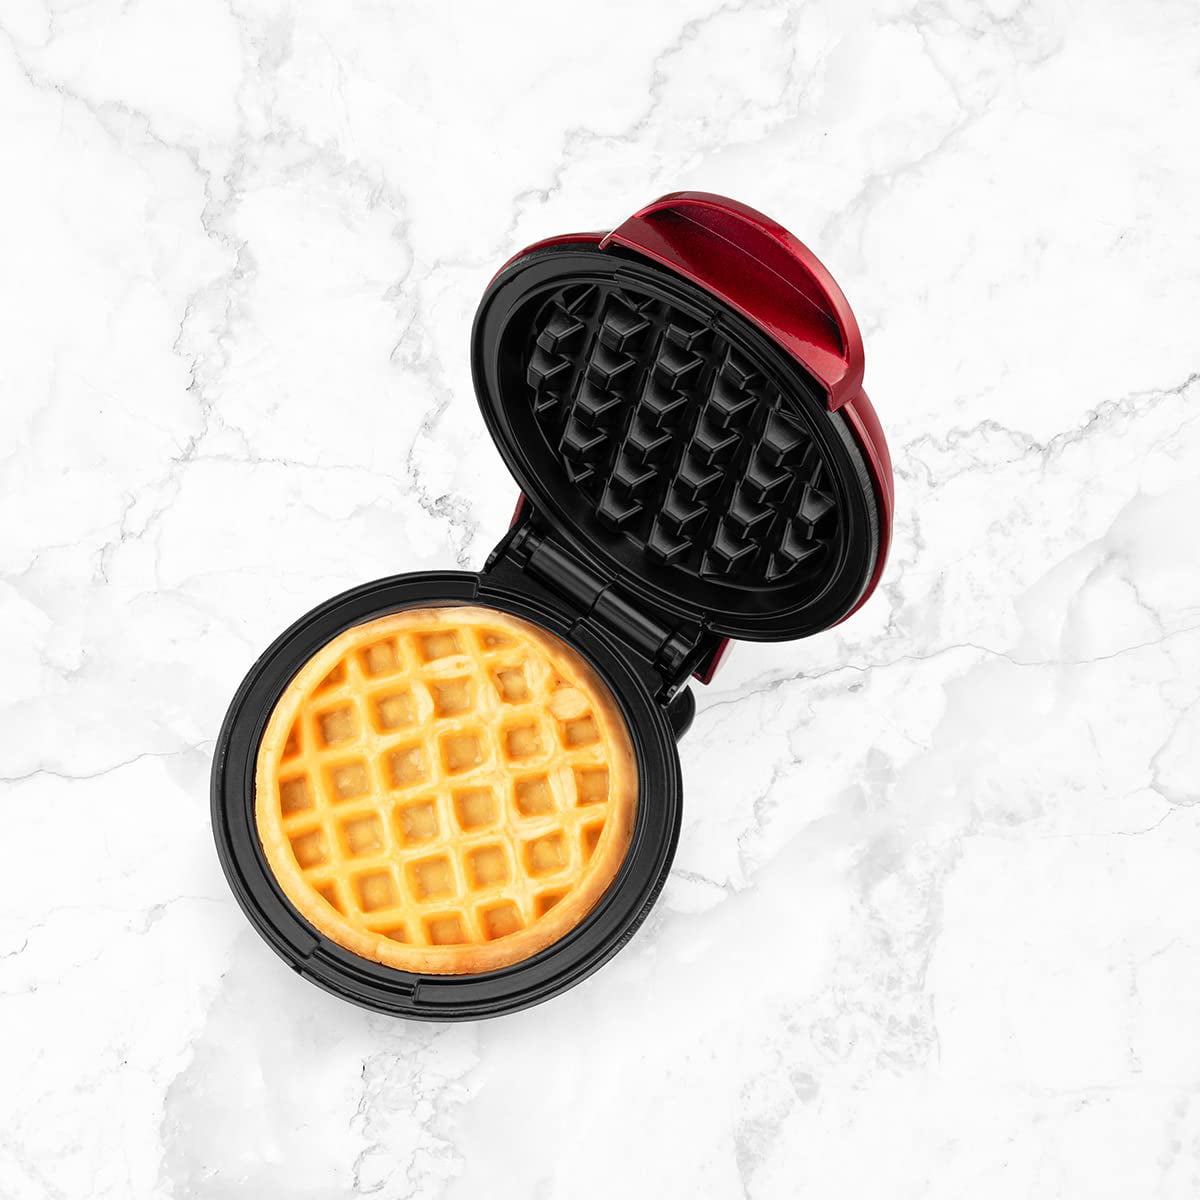 Holstein Housewares 4” Personal Waffle Maker, Black/Copper - Delicious  Waffles in Minutes